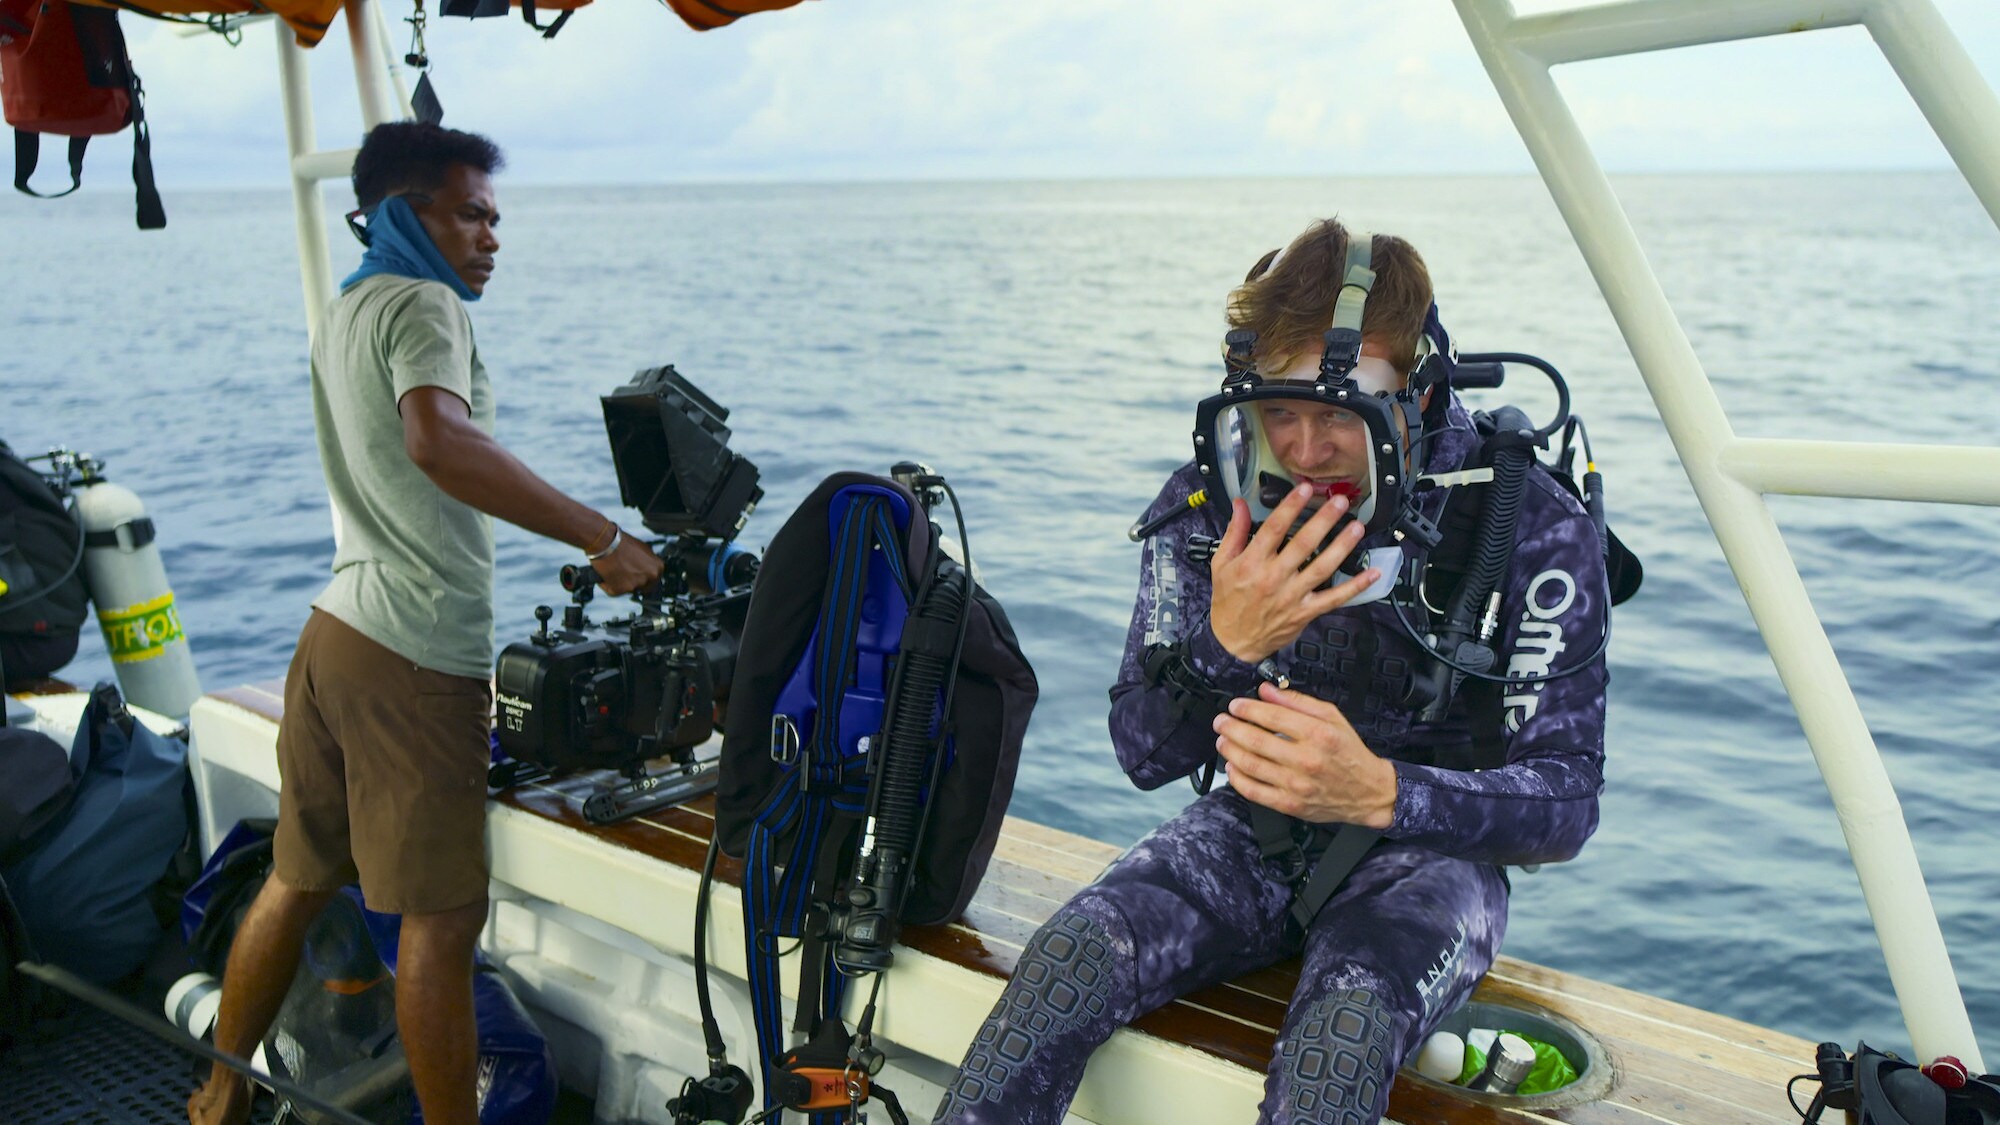 Bertie Gregory sitting on the edge of the boat getting ready to go in to the water. (National Geographic for Disney+/Spencer Millsap)